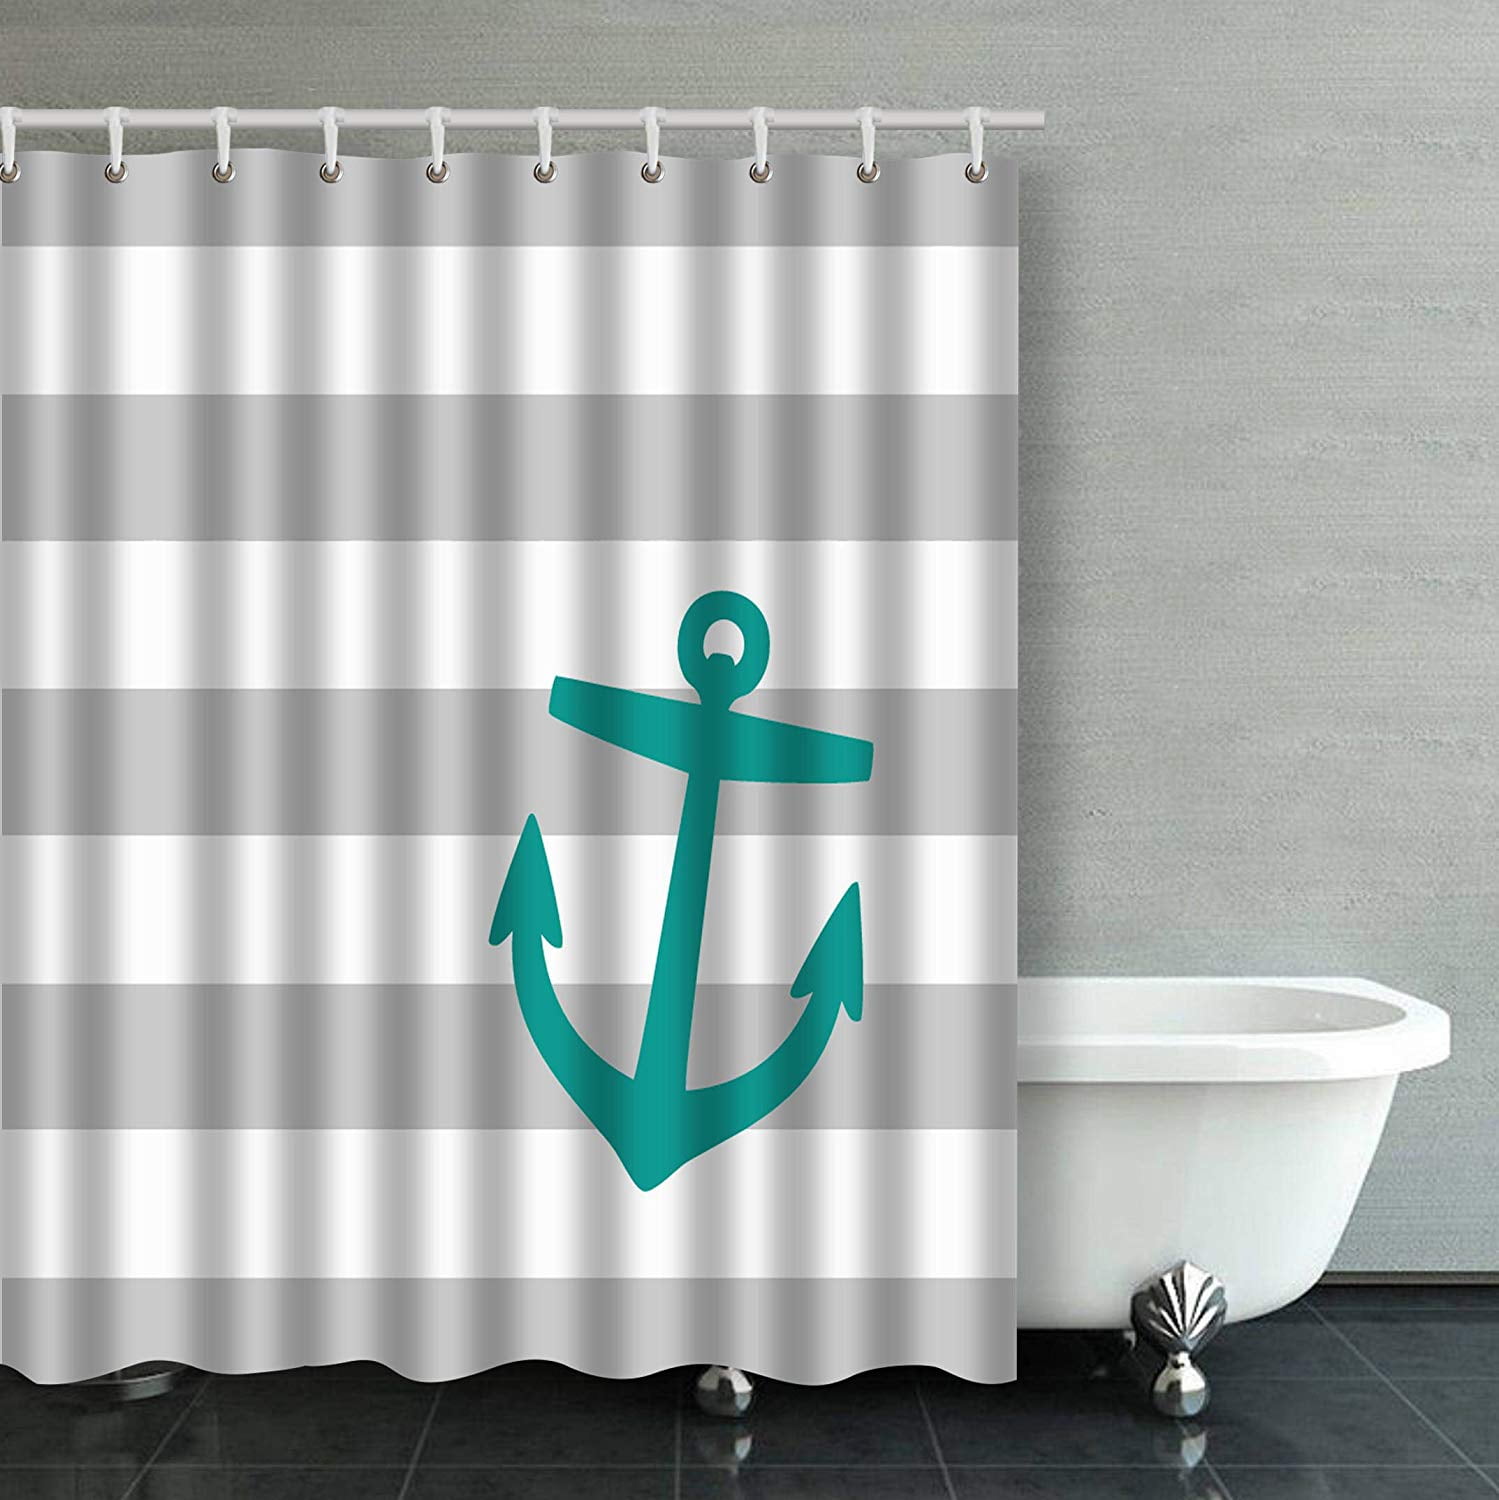 Bpbop Stripe Pattern Gray And Teal, Anchor Bathroom Shower Curtain